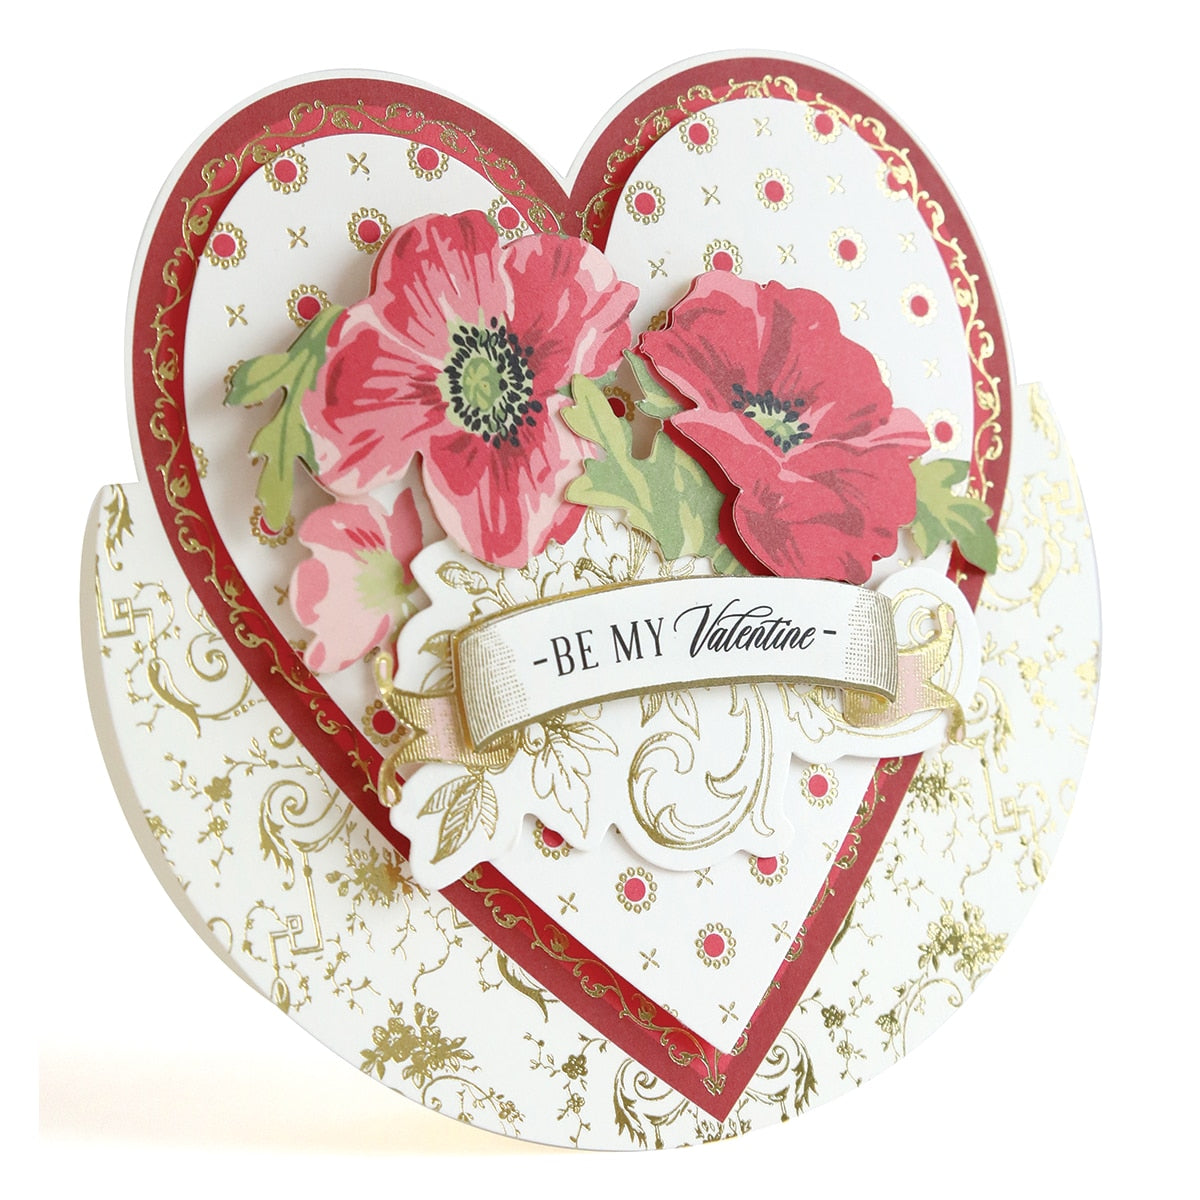 a heart shaped card with flowers on it.